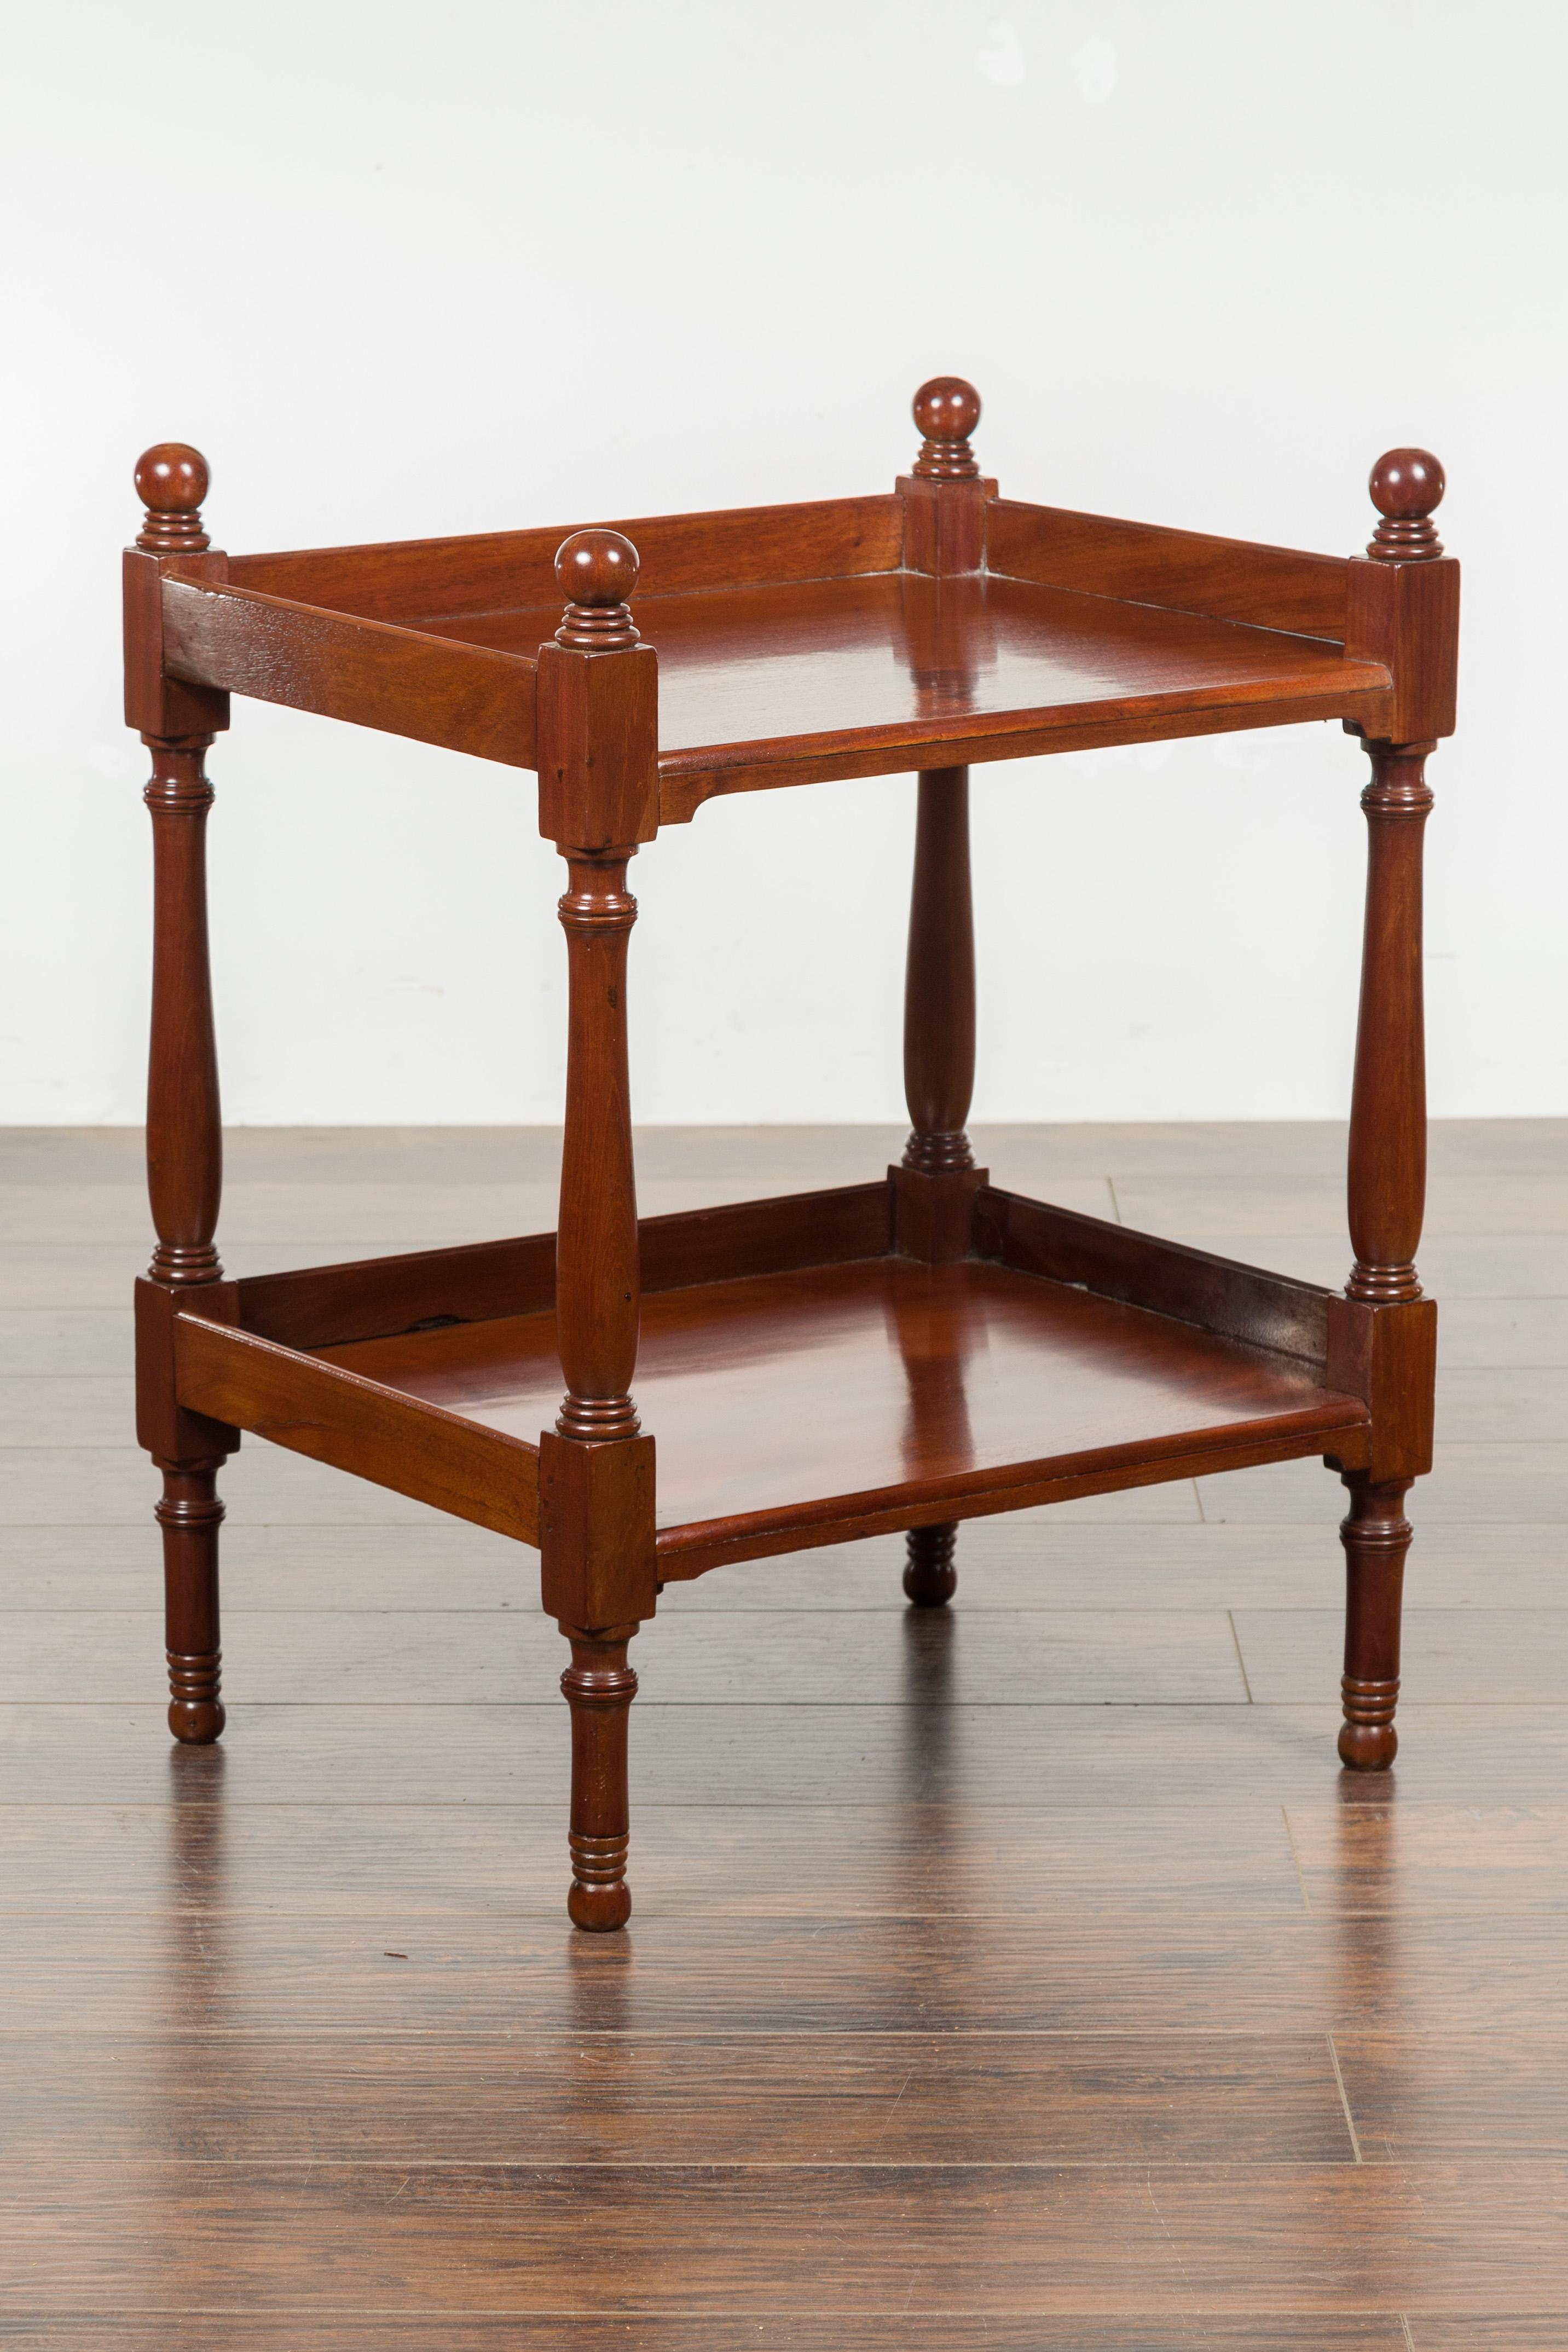 English 1870s Mahogany Tiered Table with Turned Legs and Low Shelf and Finials 6